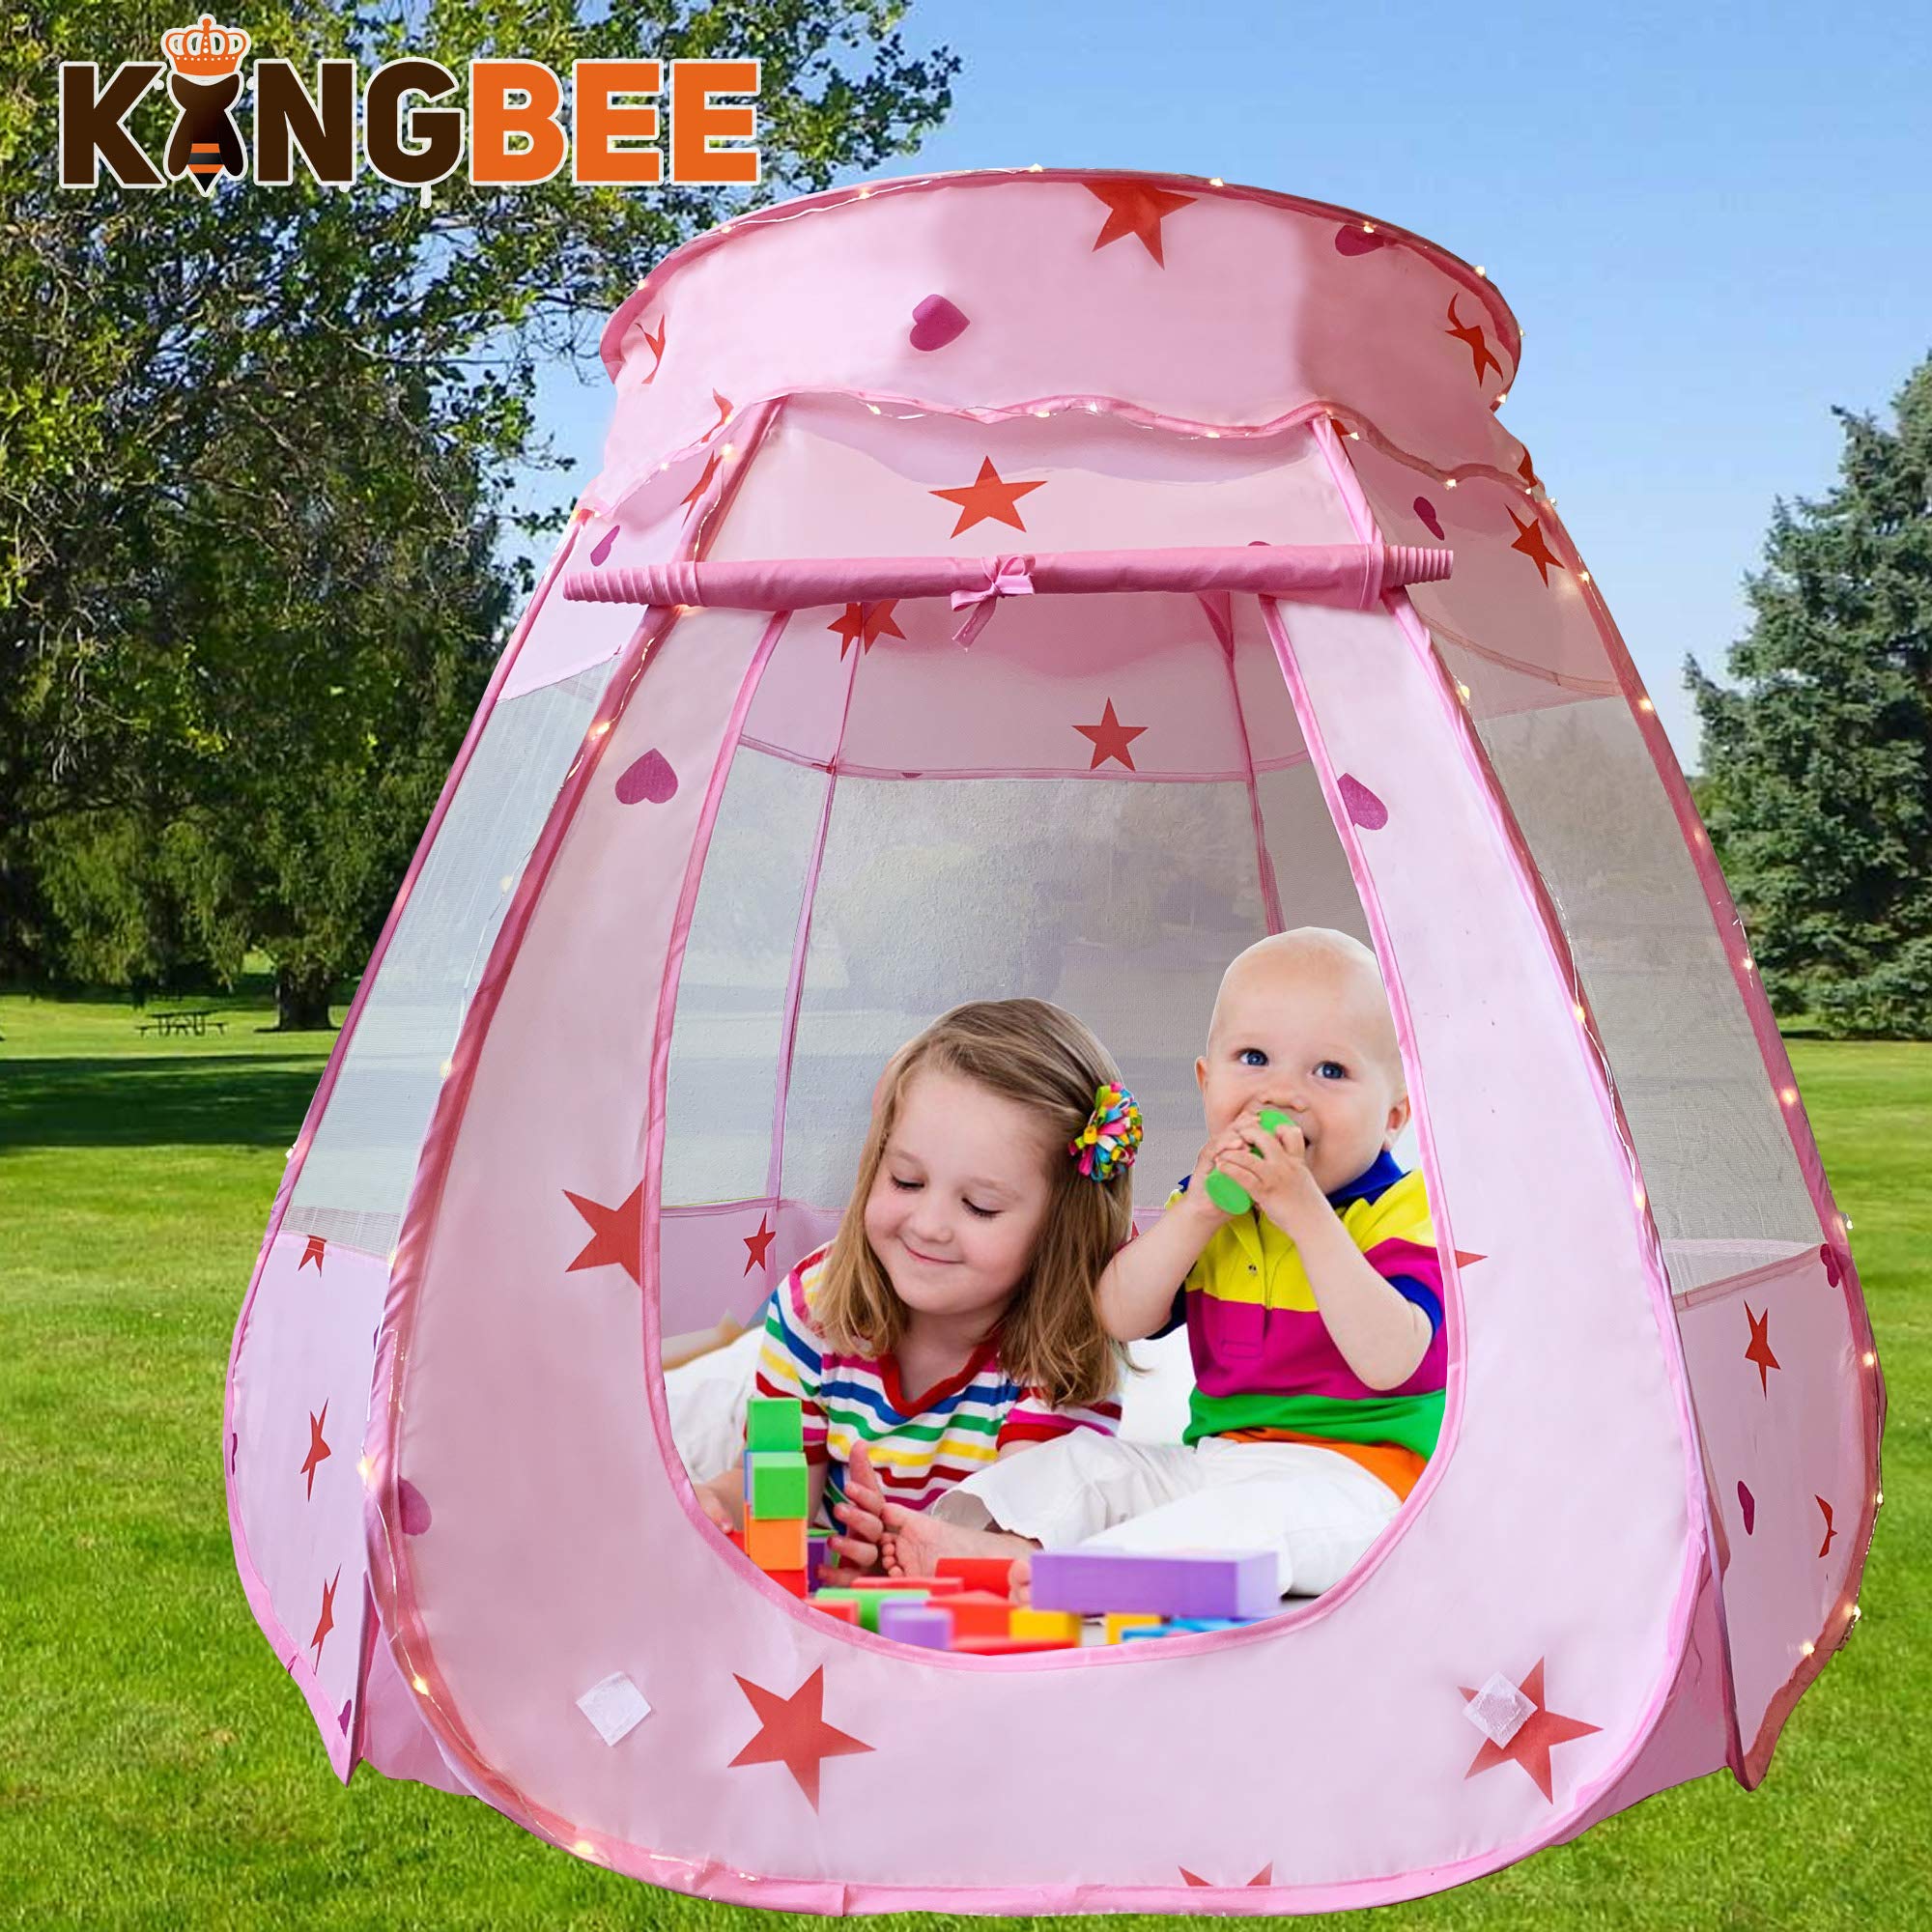 KingBee Pink Princess Pop Up Play Tent Ball Pit with Lights, Toys Gifts for Kids Girls Boys 3 4 5 6 Year Old, Baby and Toddler Will Love It. Easy Pop Up No Assembly Required, Indoor Outdoor Use (Pink)